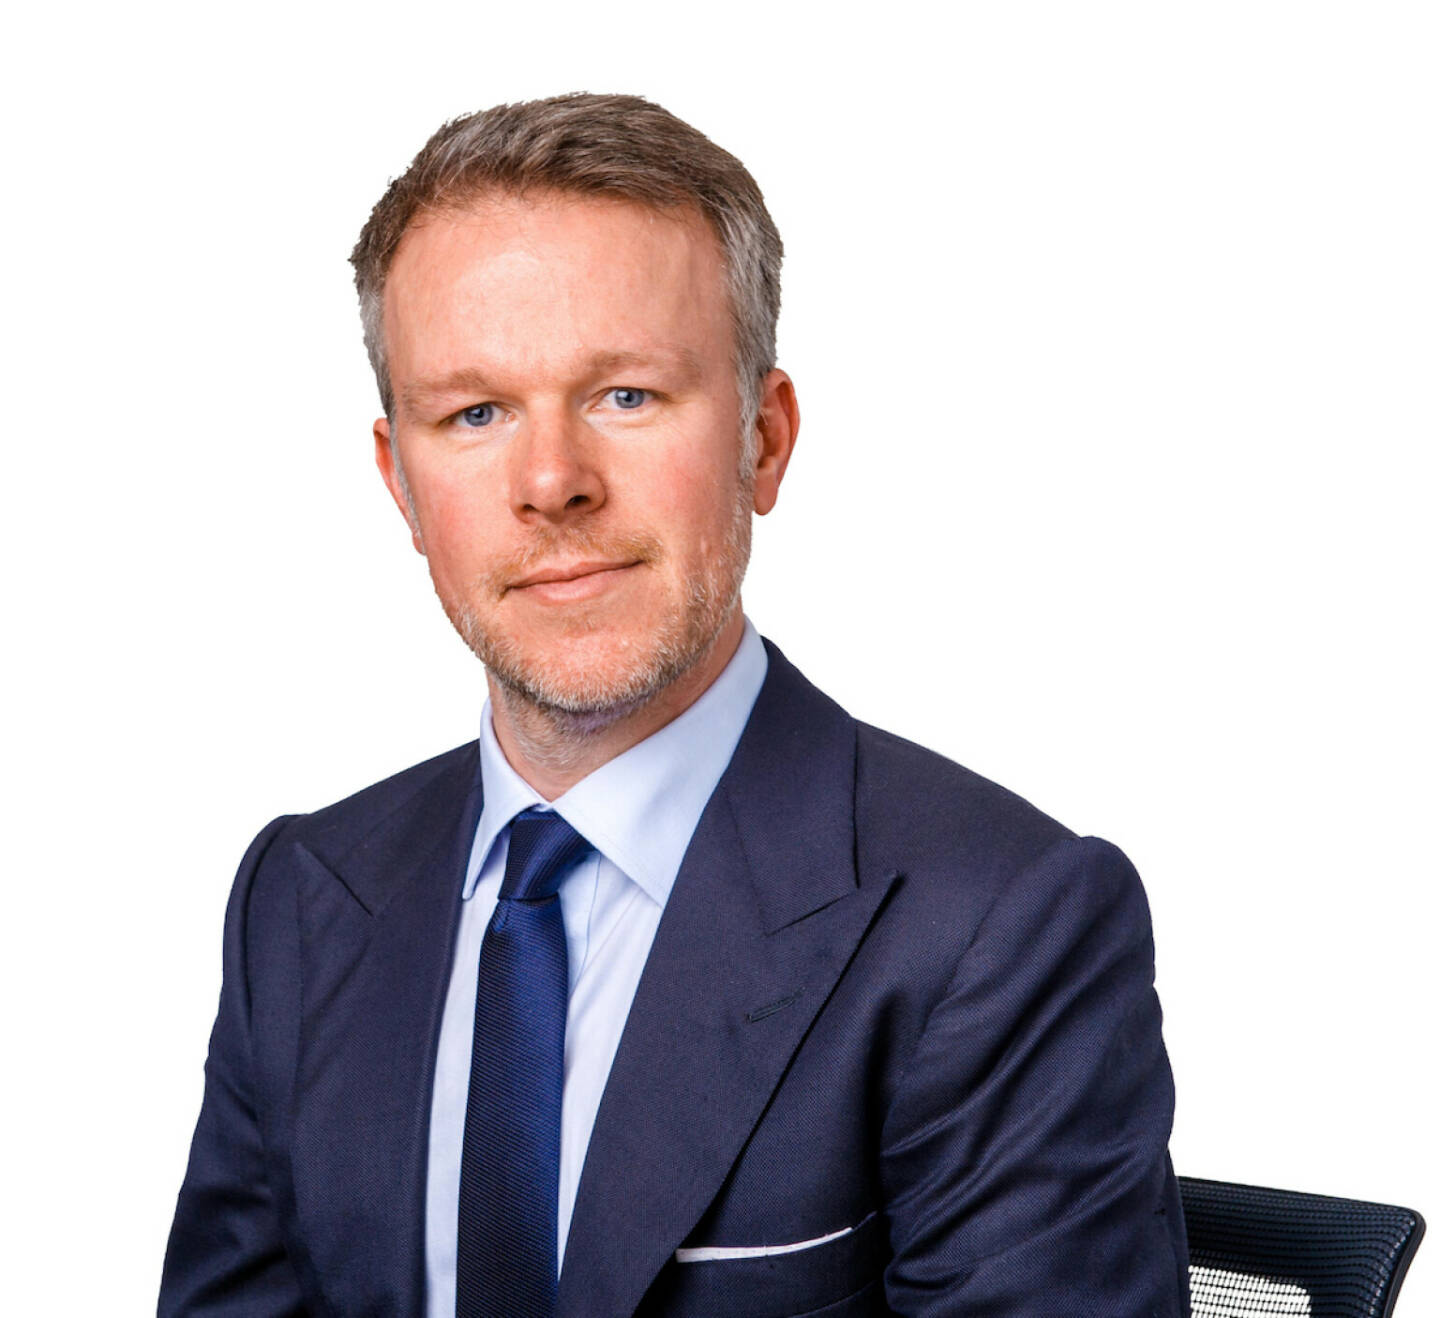 Andrew Jackson, Head of Fixed Income bei Federated Hermes; Credit: Federated Hermes